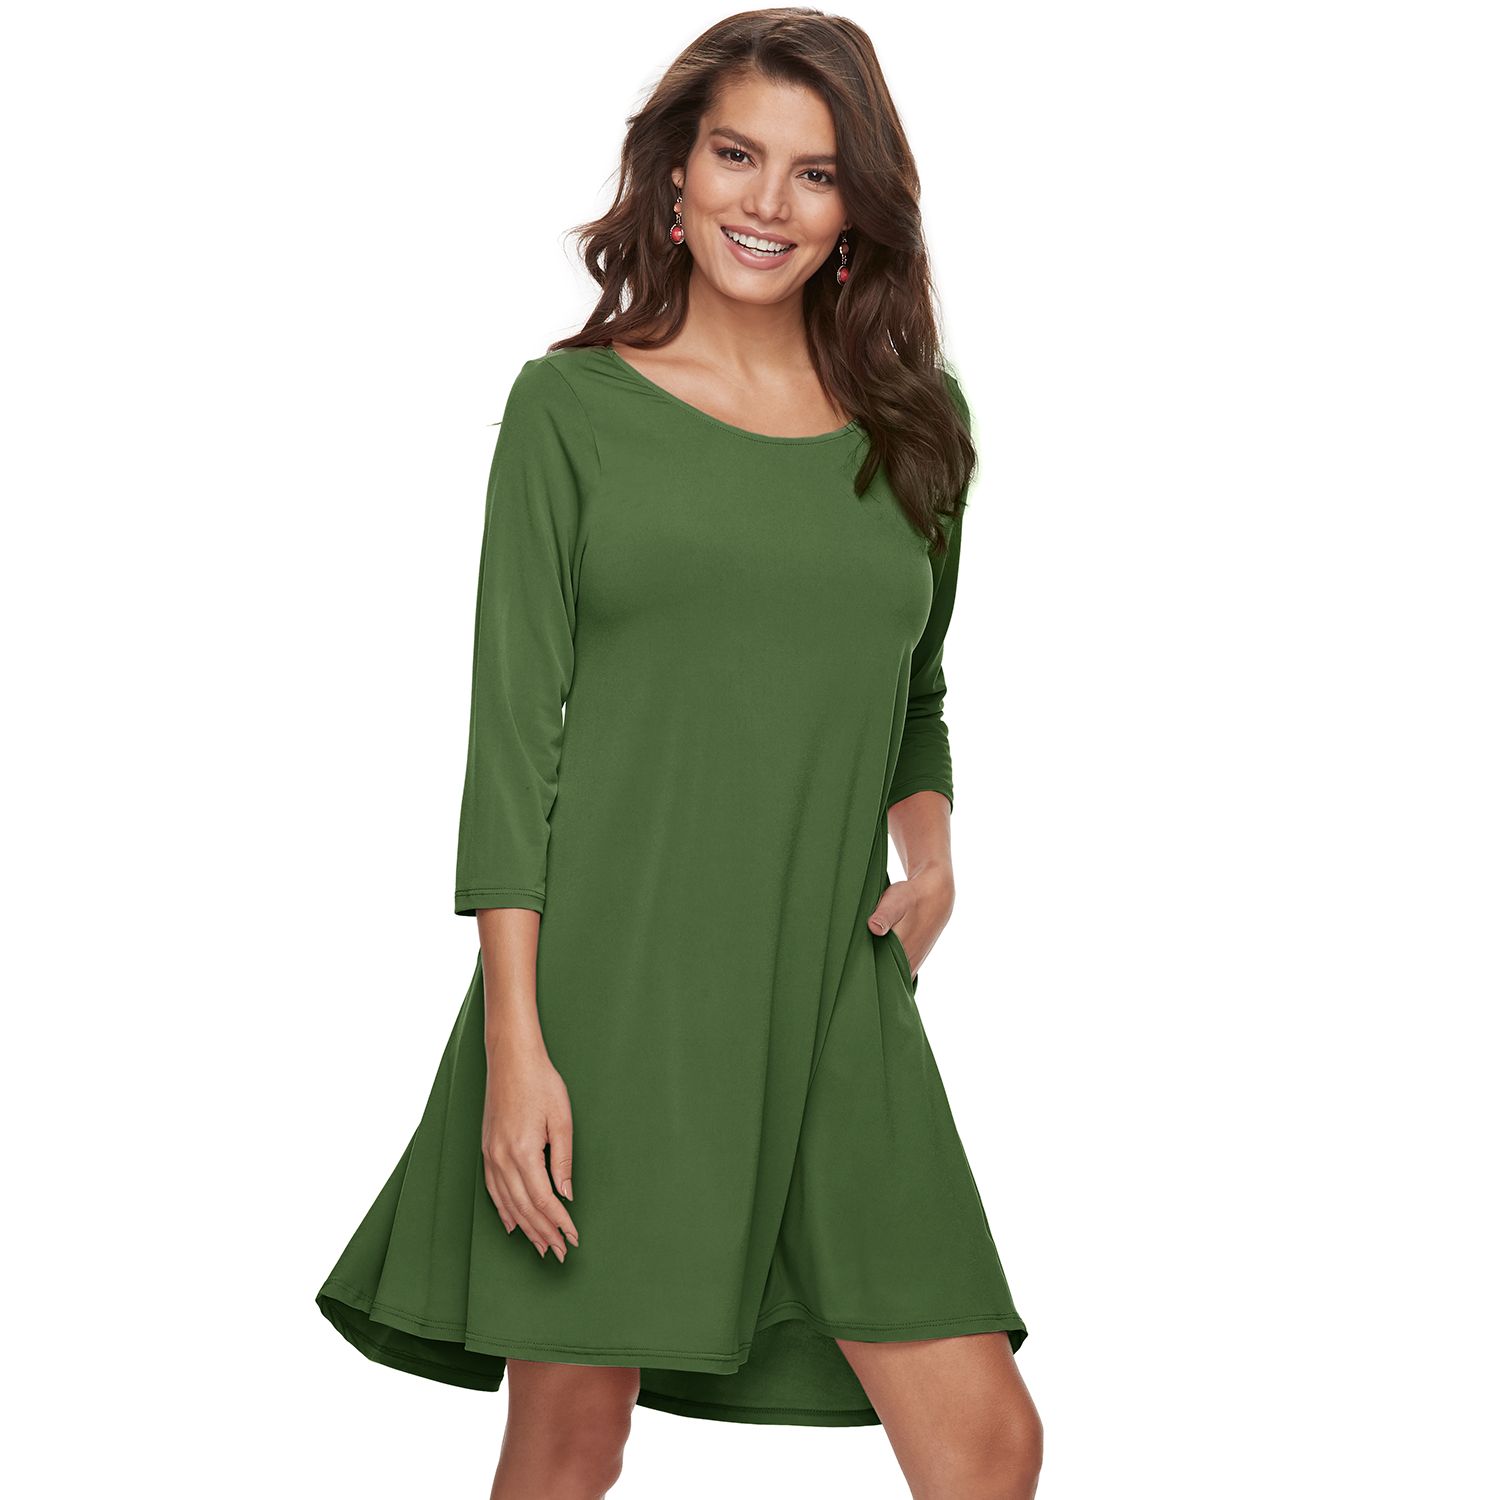 shades of green dresses